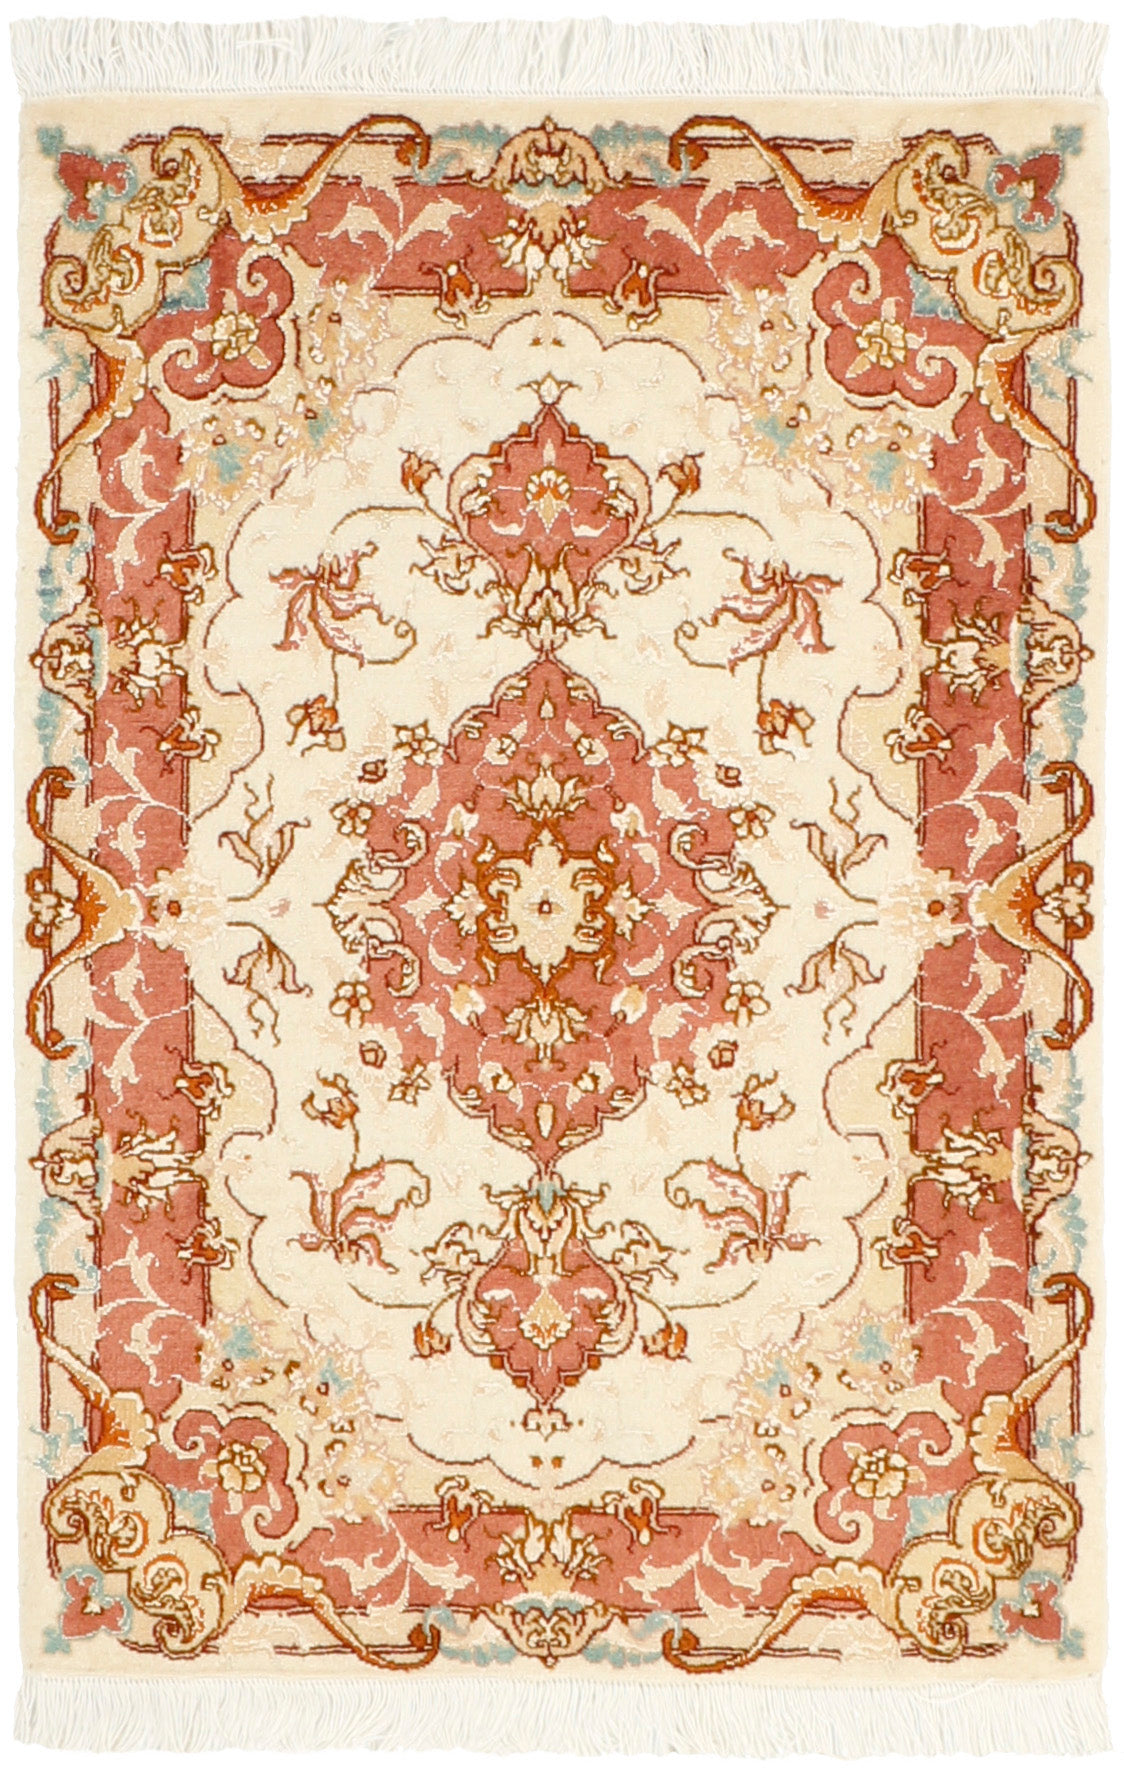 Authentic persian rug with traditional floral design in orange and coral